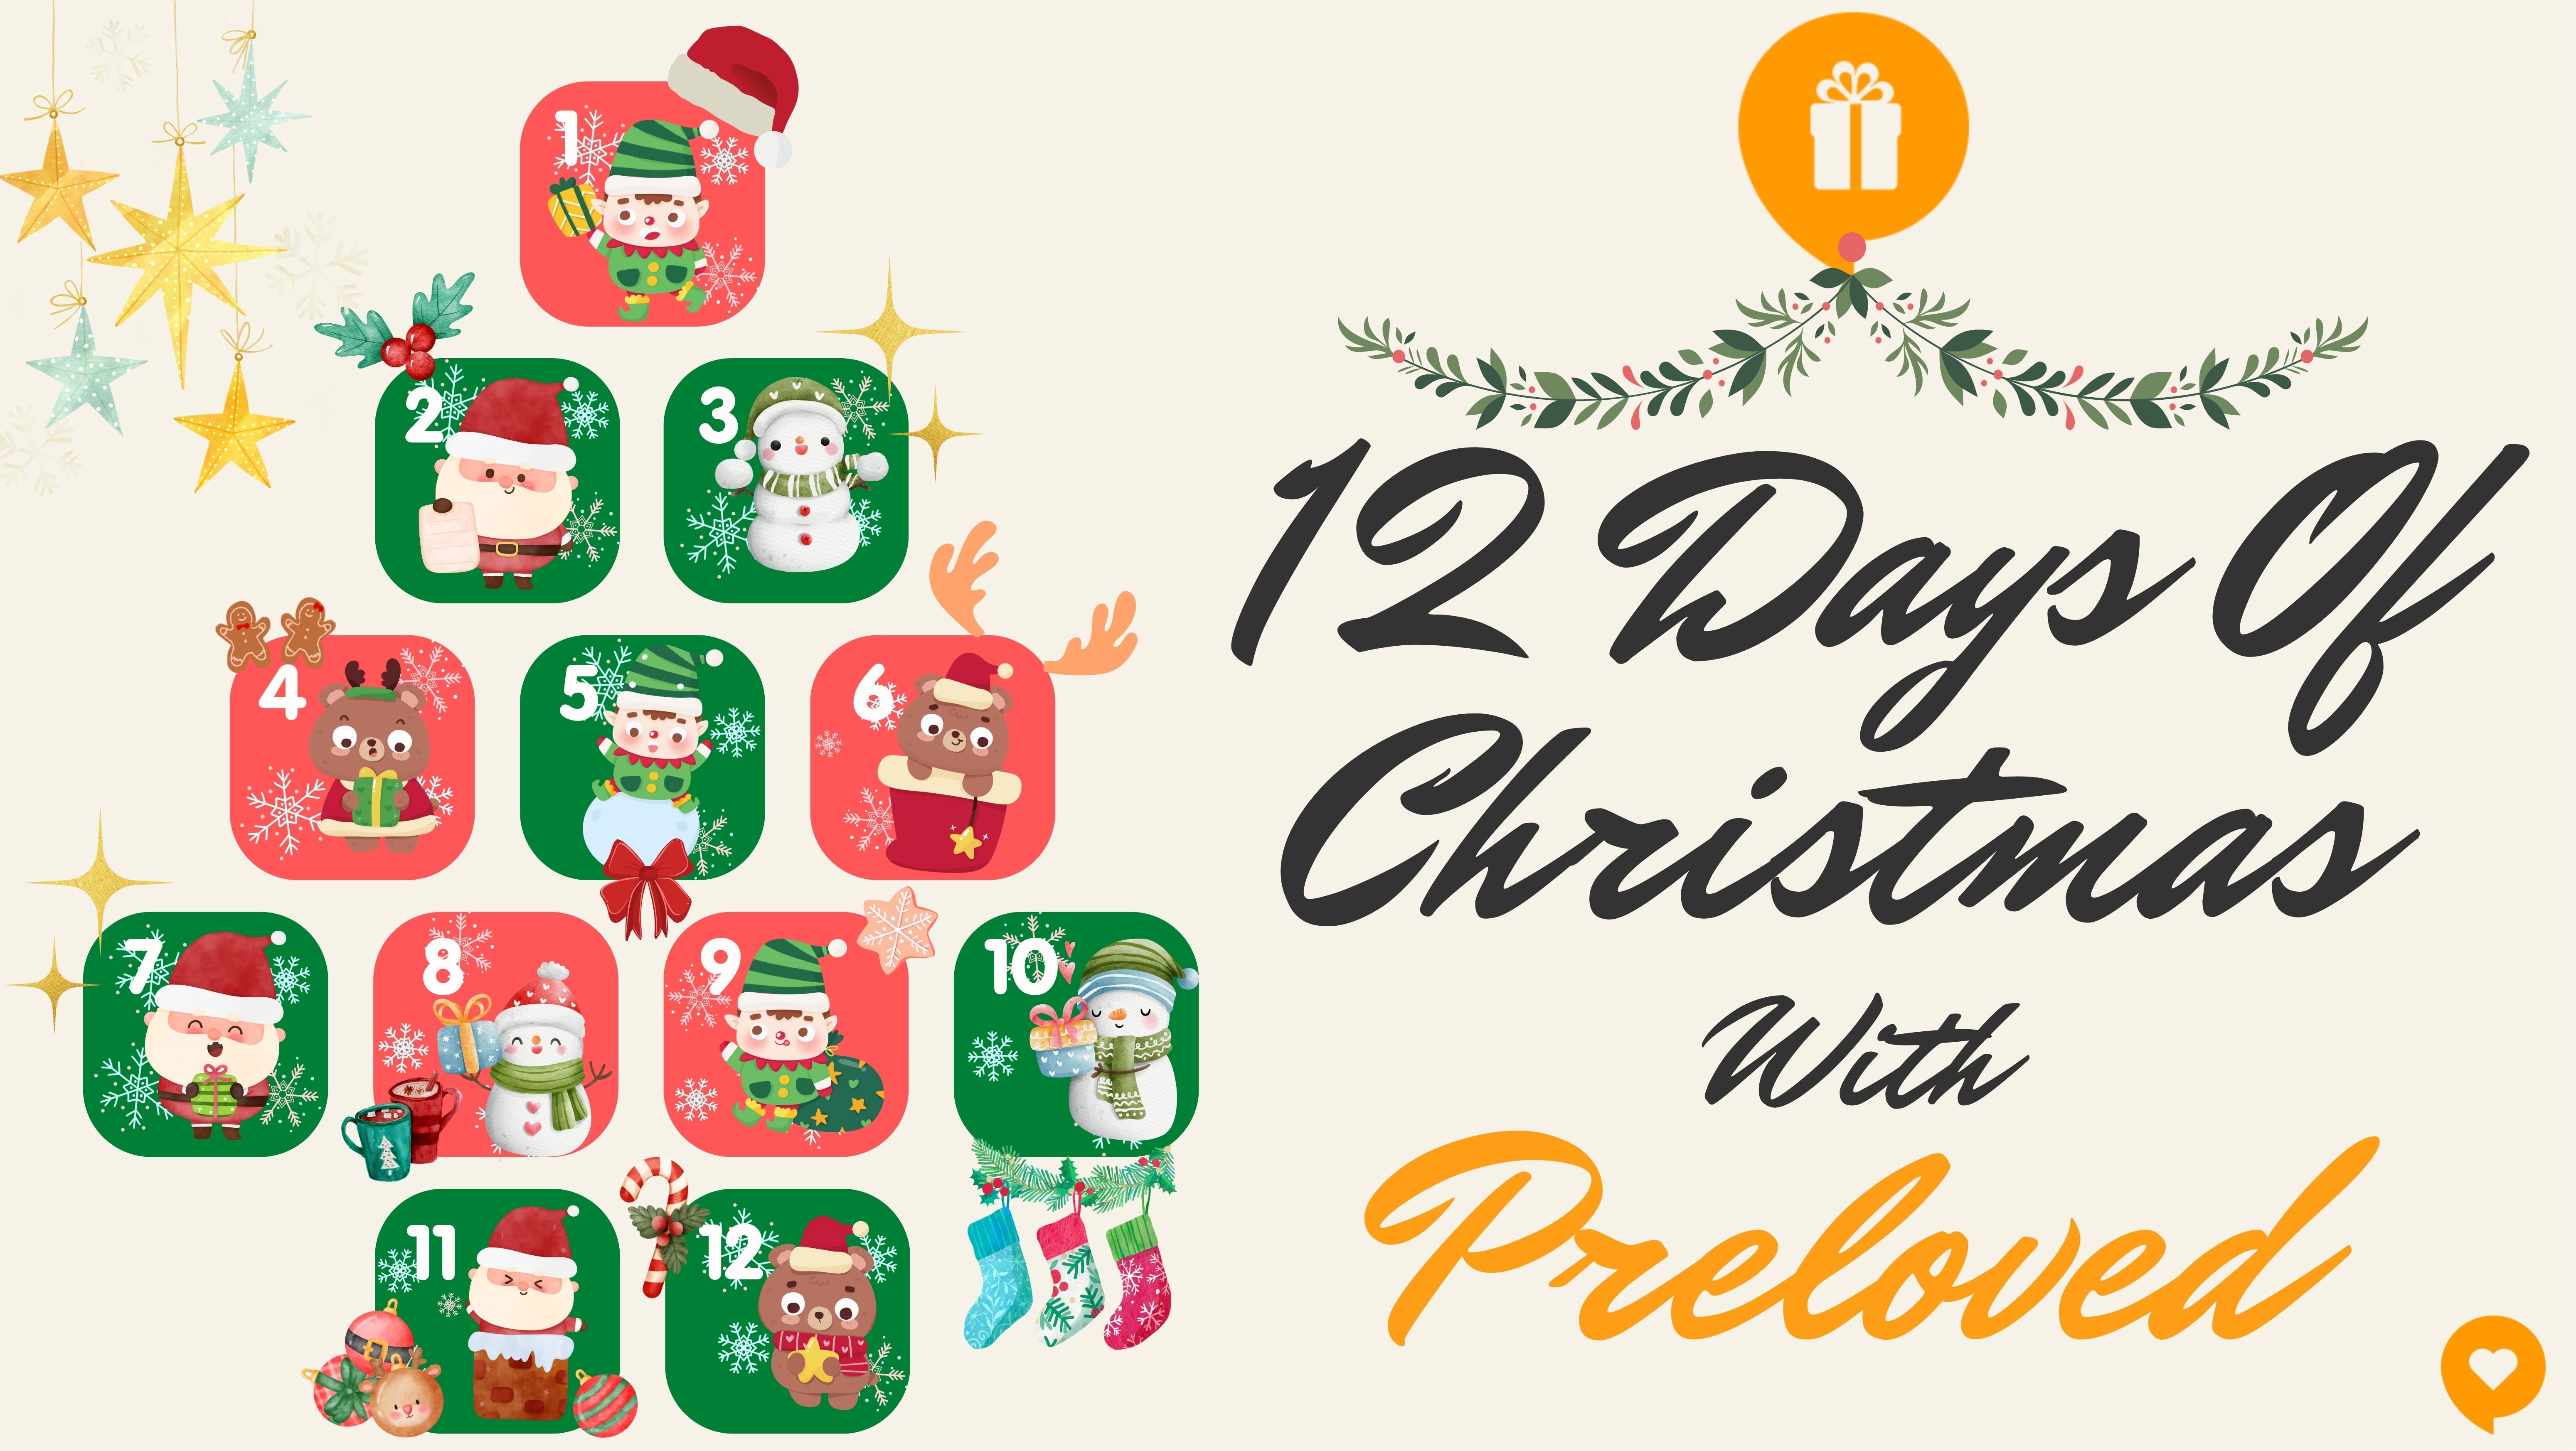 12 Days Of Christmas: Get To Know The Brands